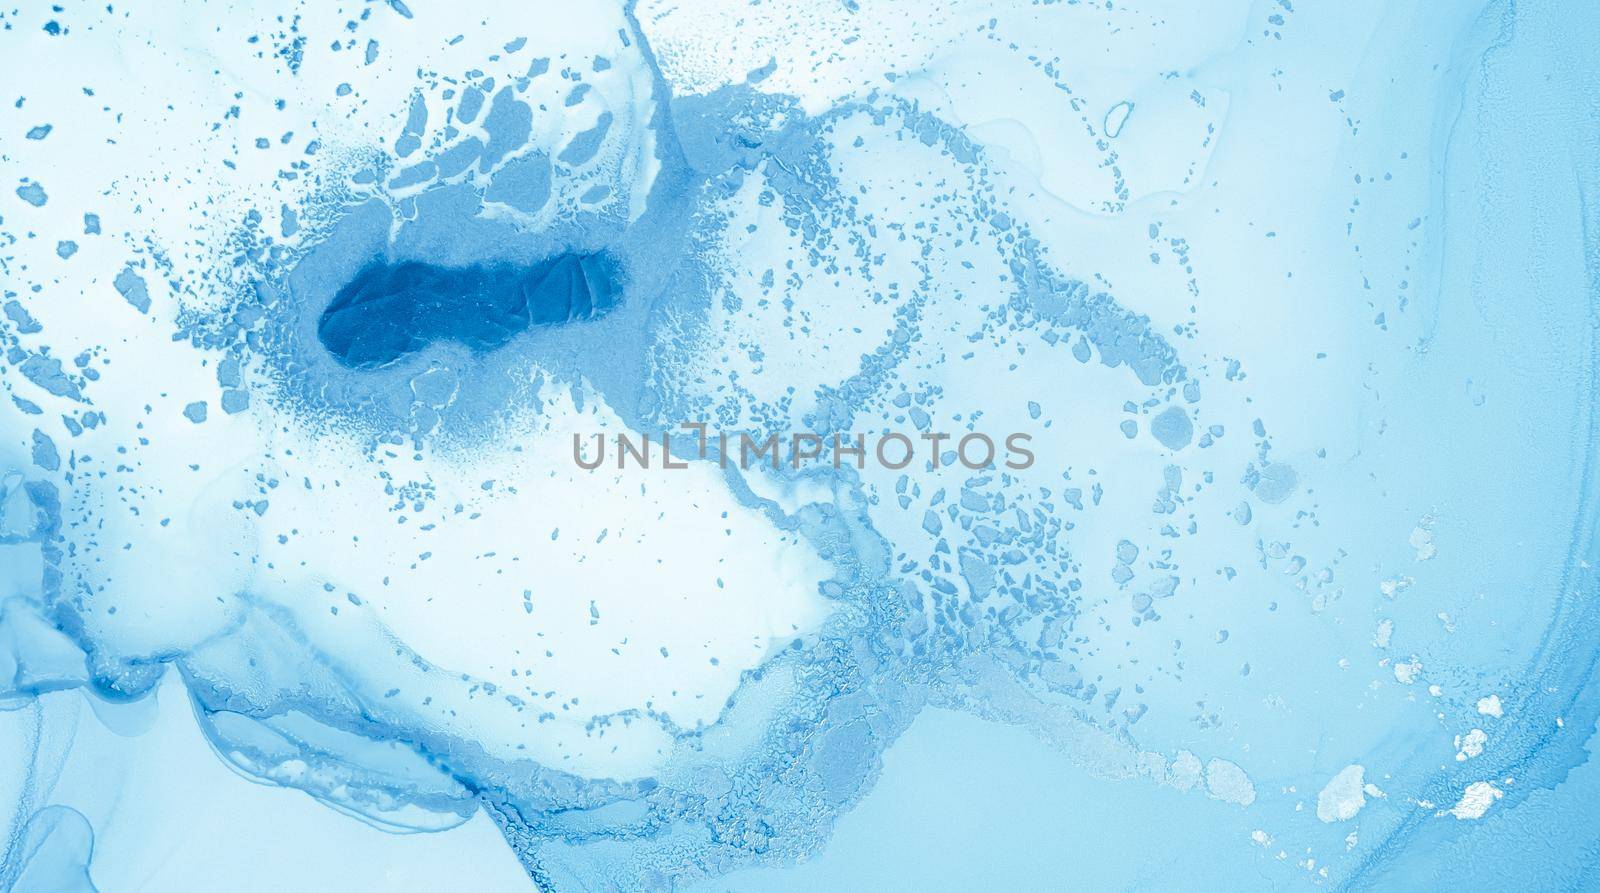 Ink Colours Mix. Fluid Flow Background. Indigo Alcohol Paint. Ink Colours Mix Water. Ethereal Creative Splash. Airy Deep Pattern. Blue Art Print. Oil Abstract Texture. Liquid Mixing Inks.